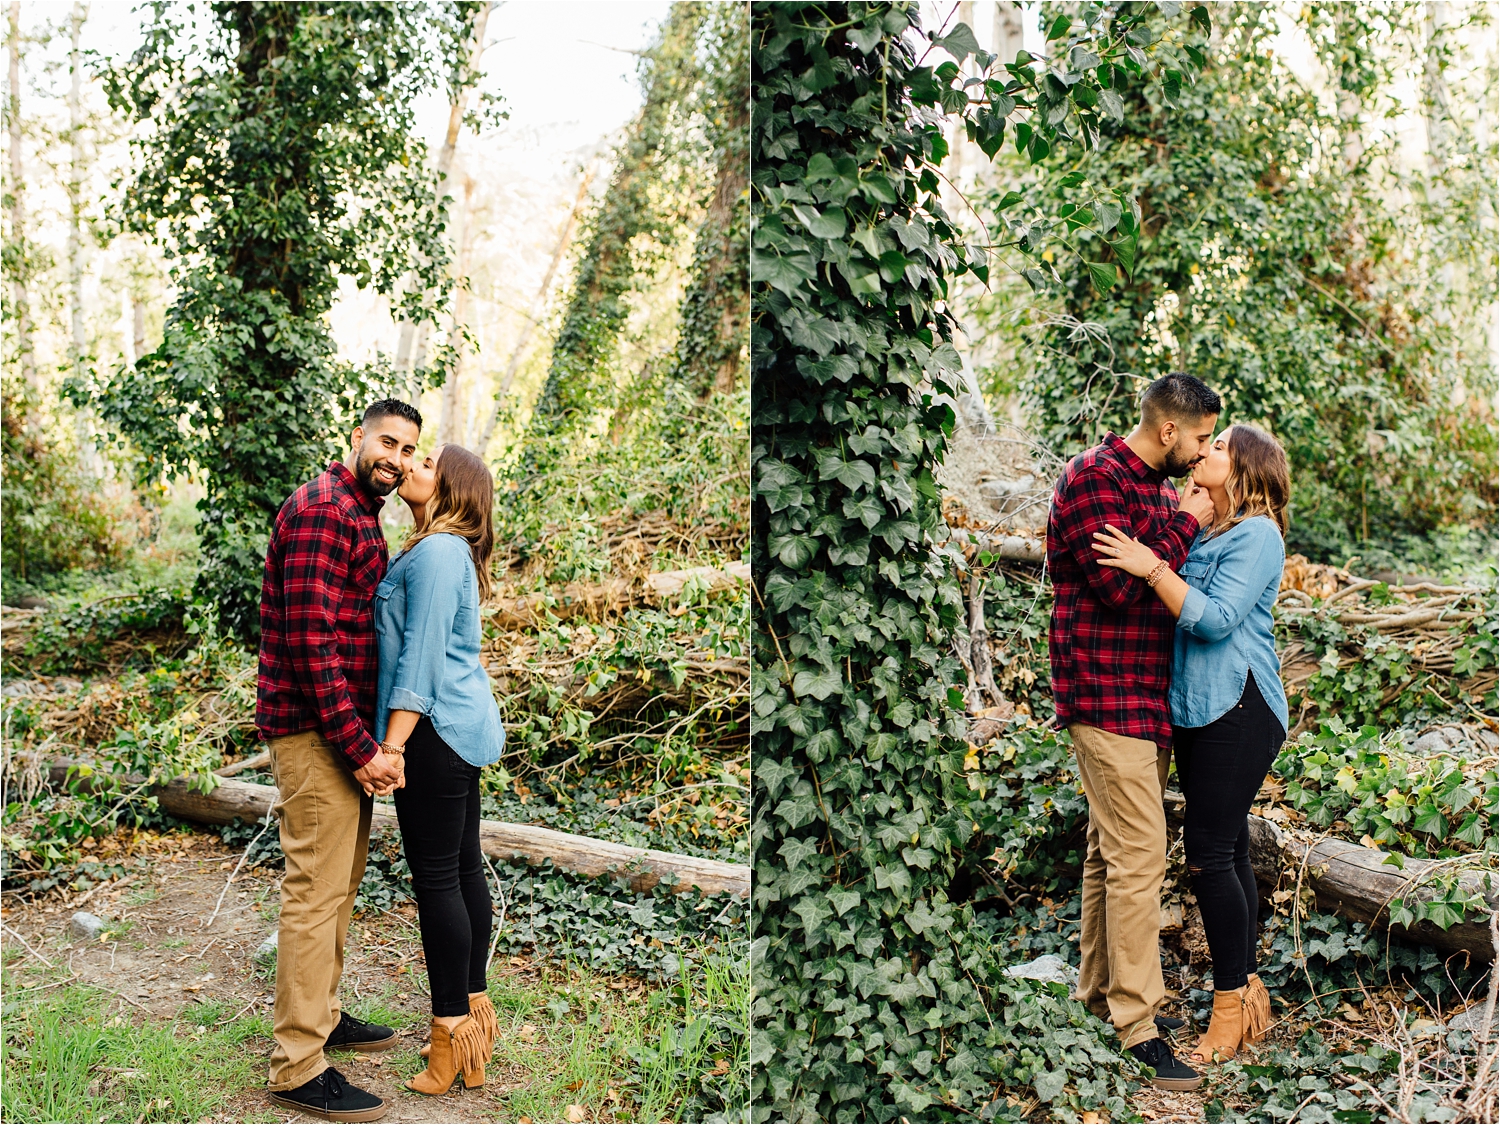 Mt. Baldy Engagement Session - Mountain Engagement Photographer - http://brittneyhannonphotography.com